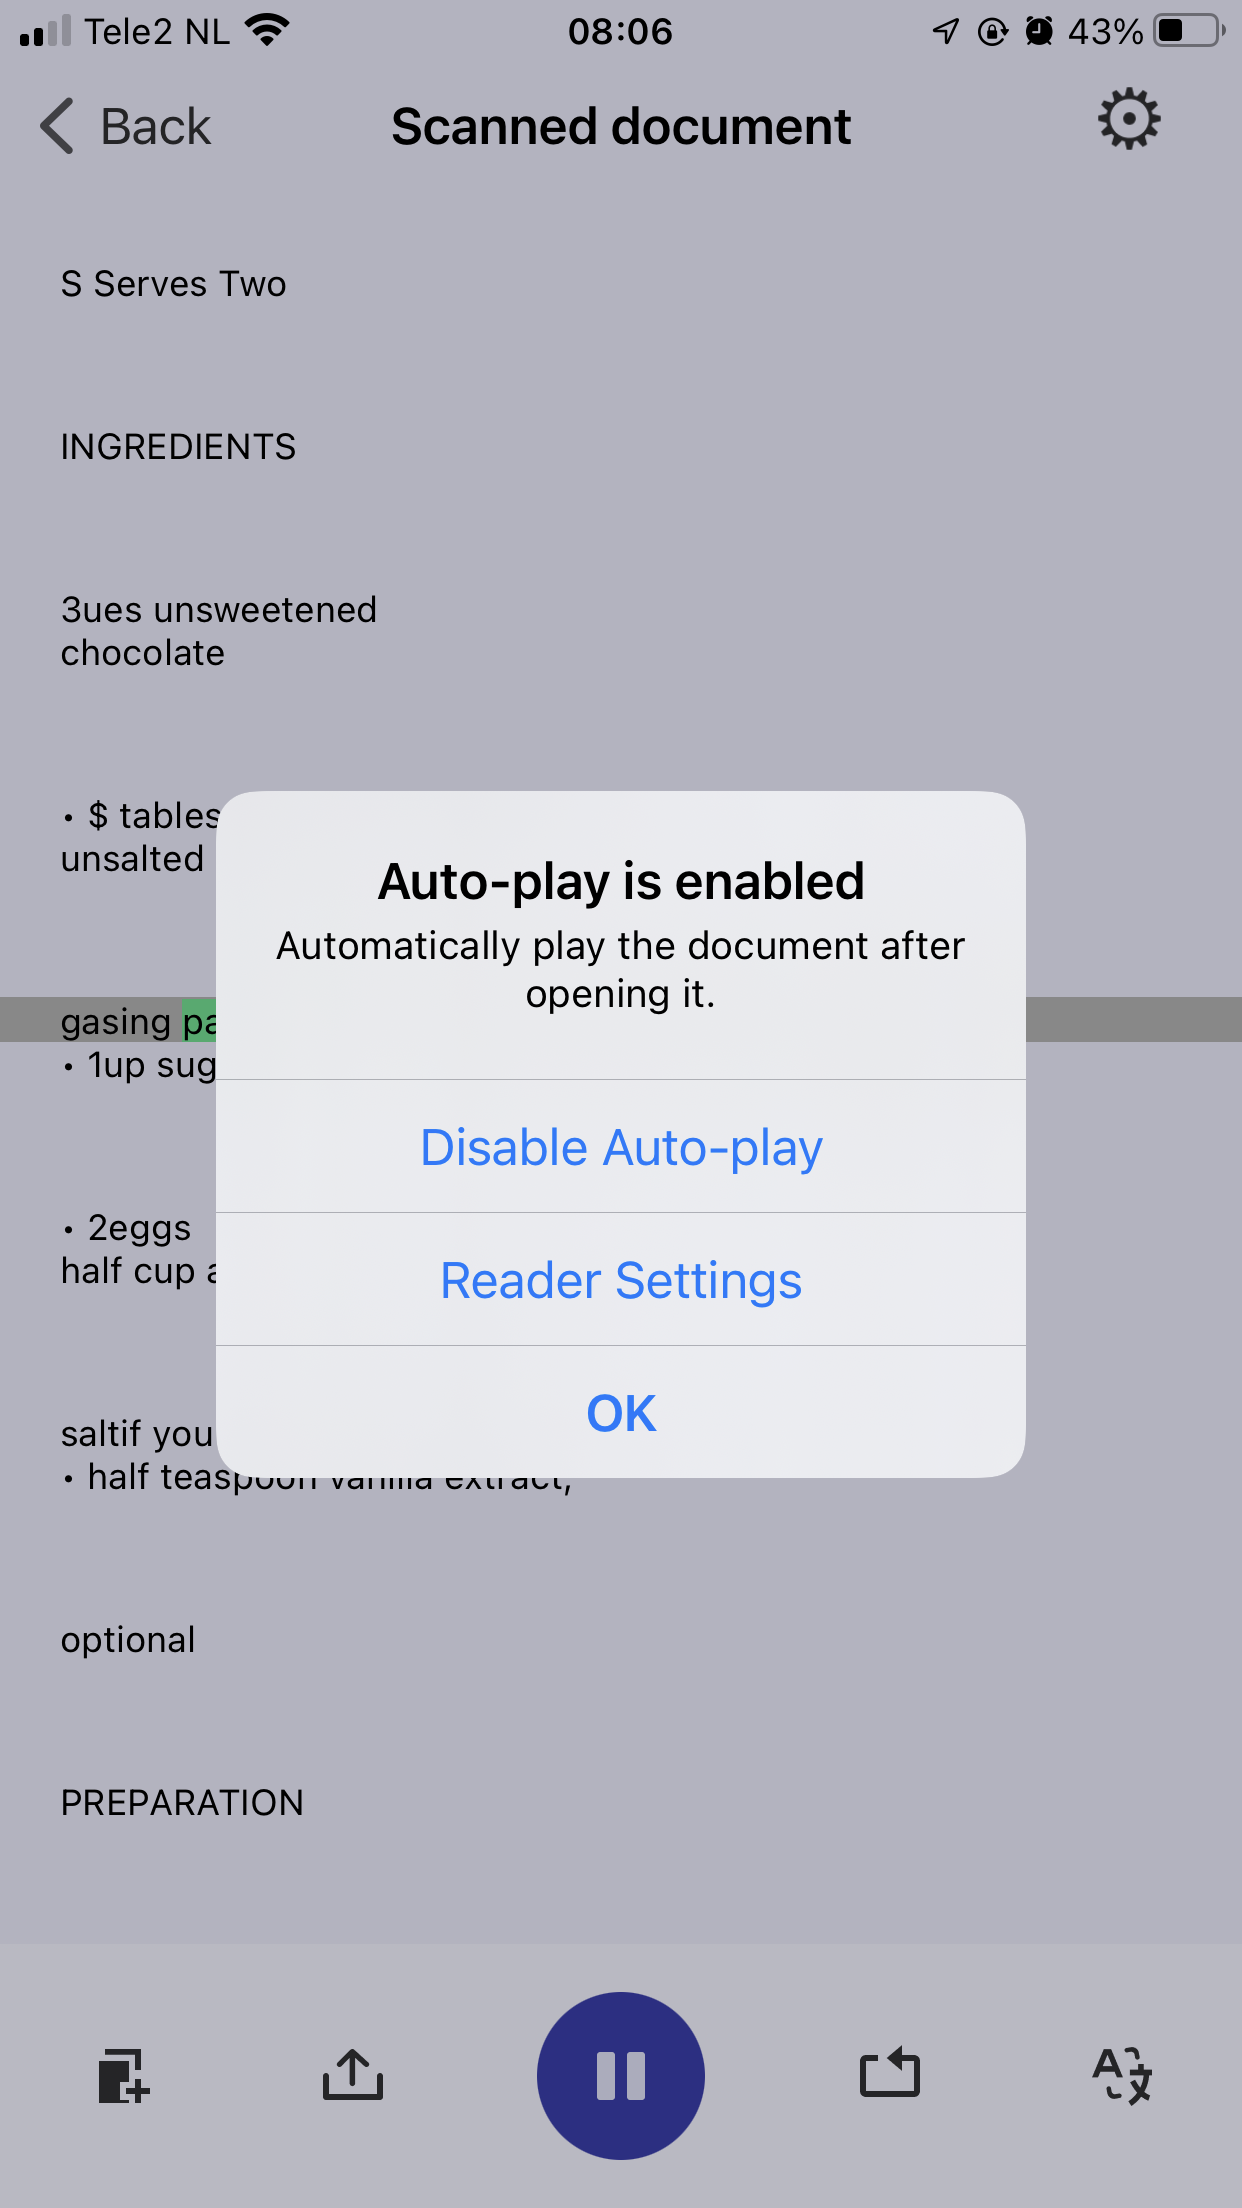 Screenshot of the pop up shown when opening the reader when using Scan Text for the first time. The first time, the app ask for autorization to enable or disable the Auto-play feature on the reader.